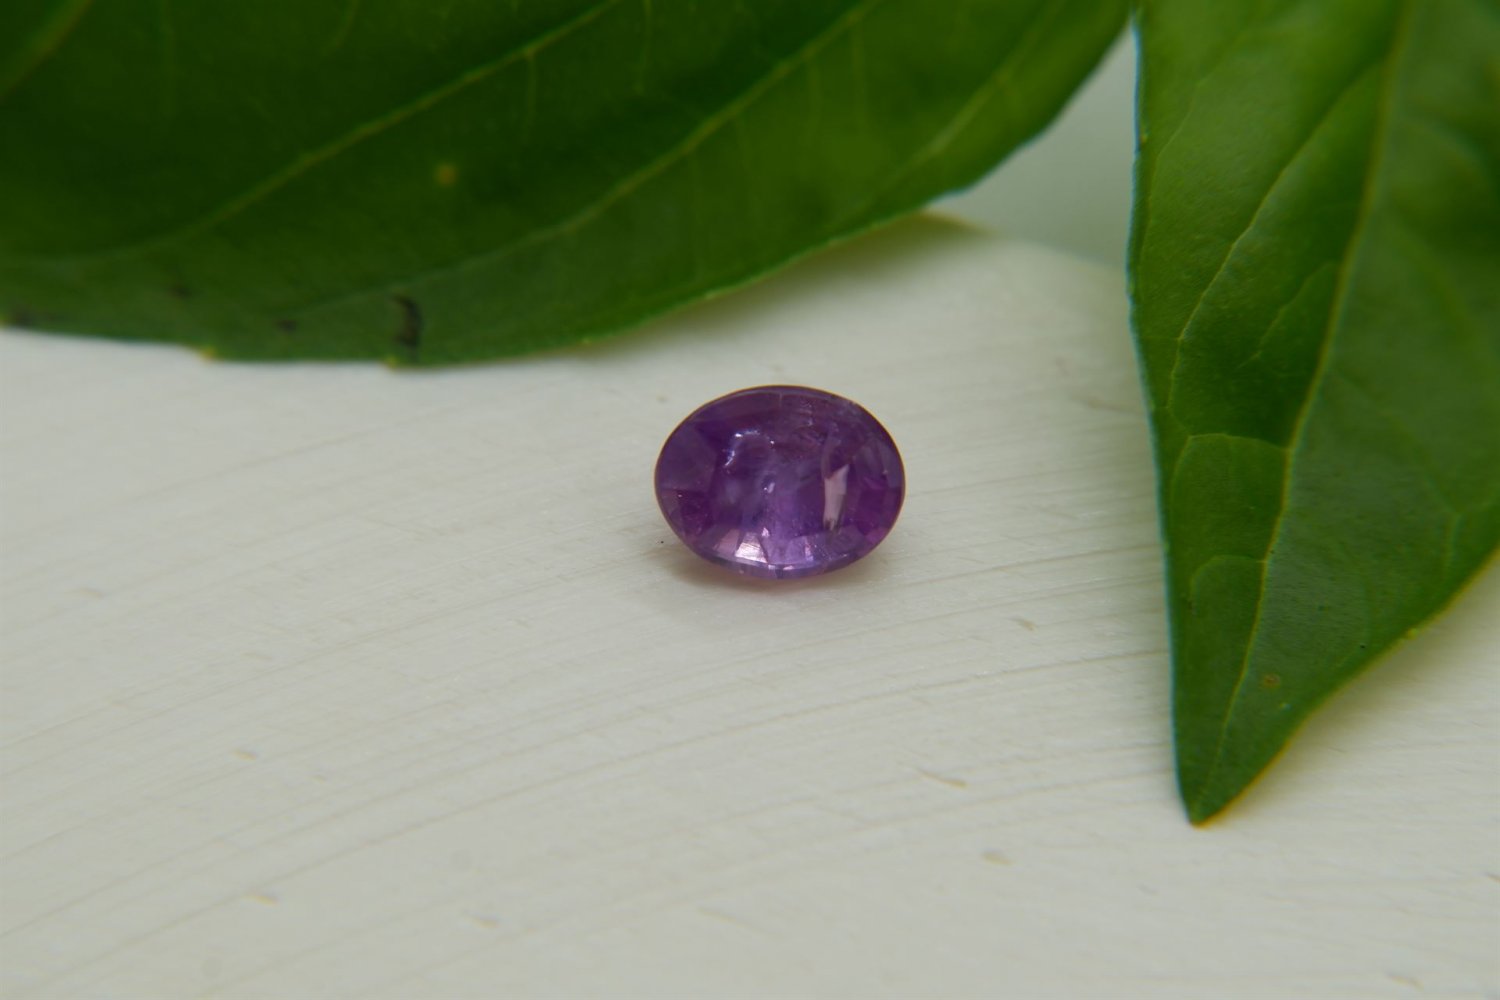 1.20 ct  Violet Pink Sapphire, handcrafted cut premium handcrafted oval cut with lustrous finish Sri